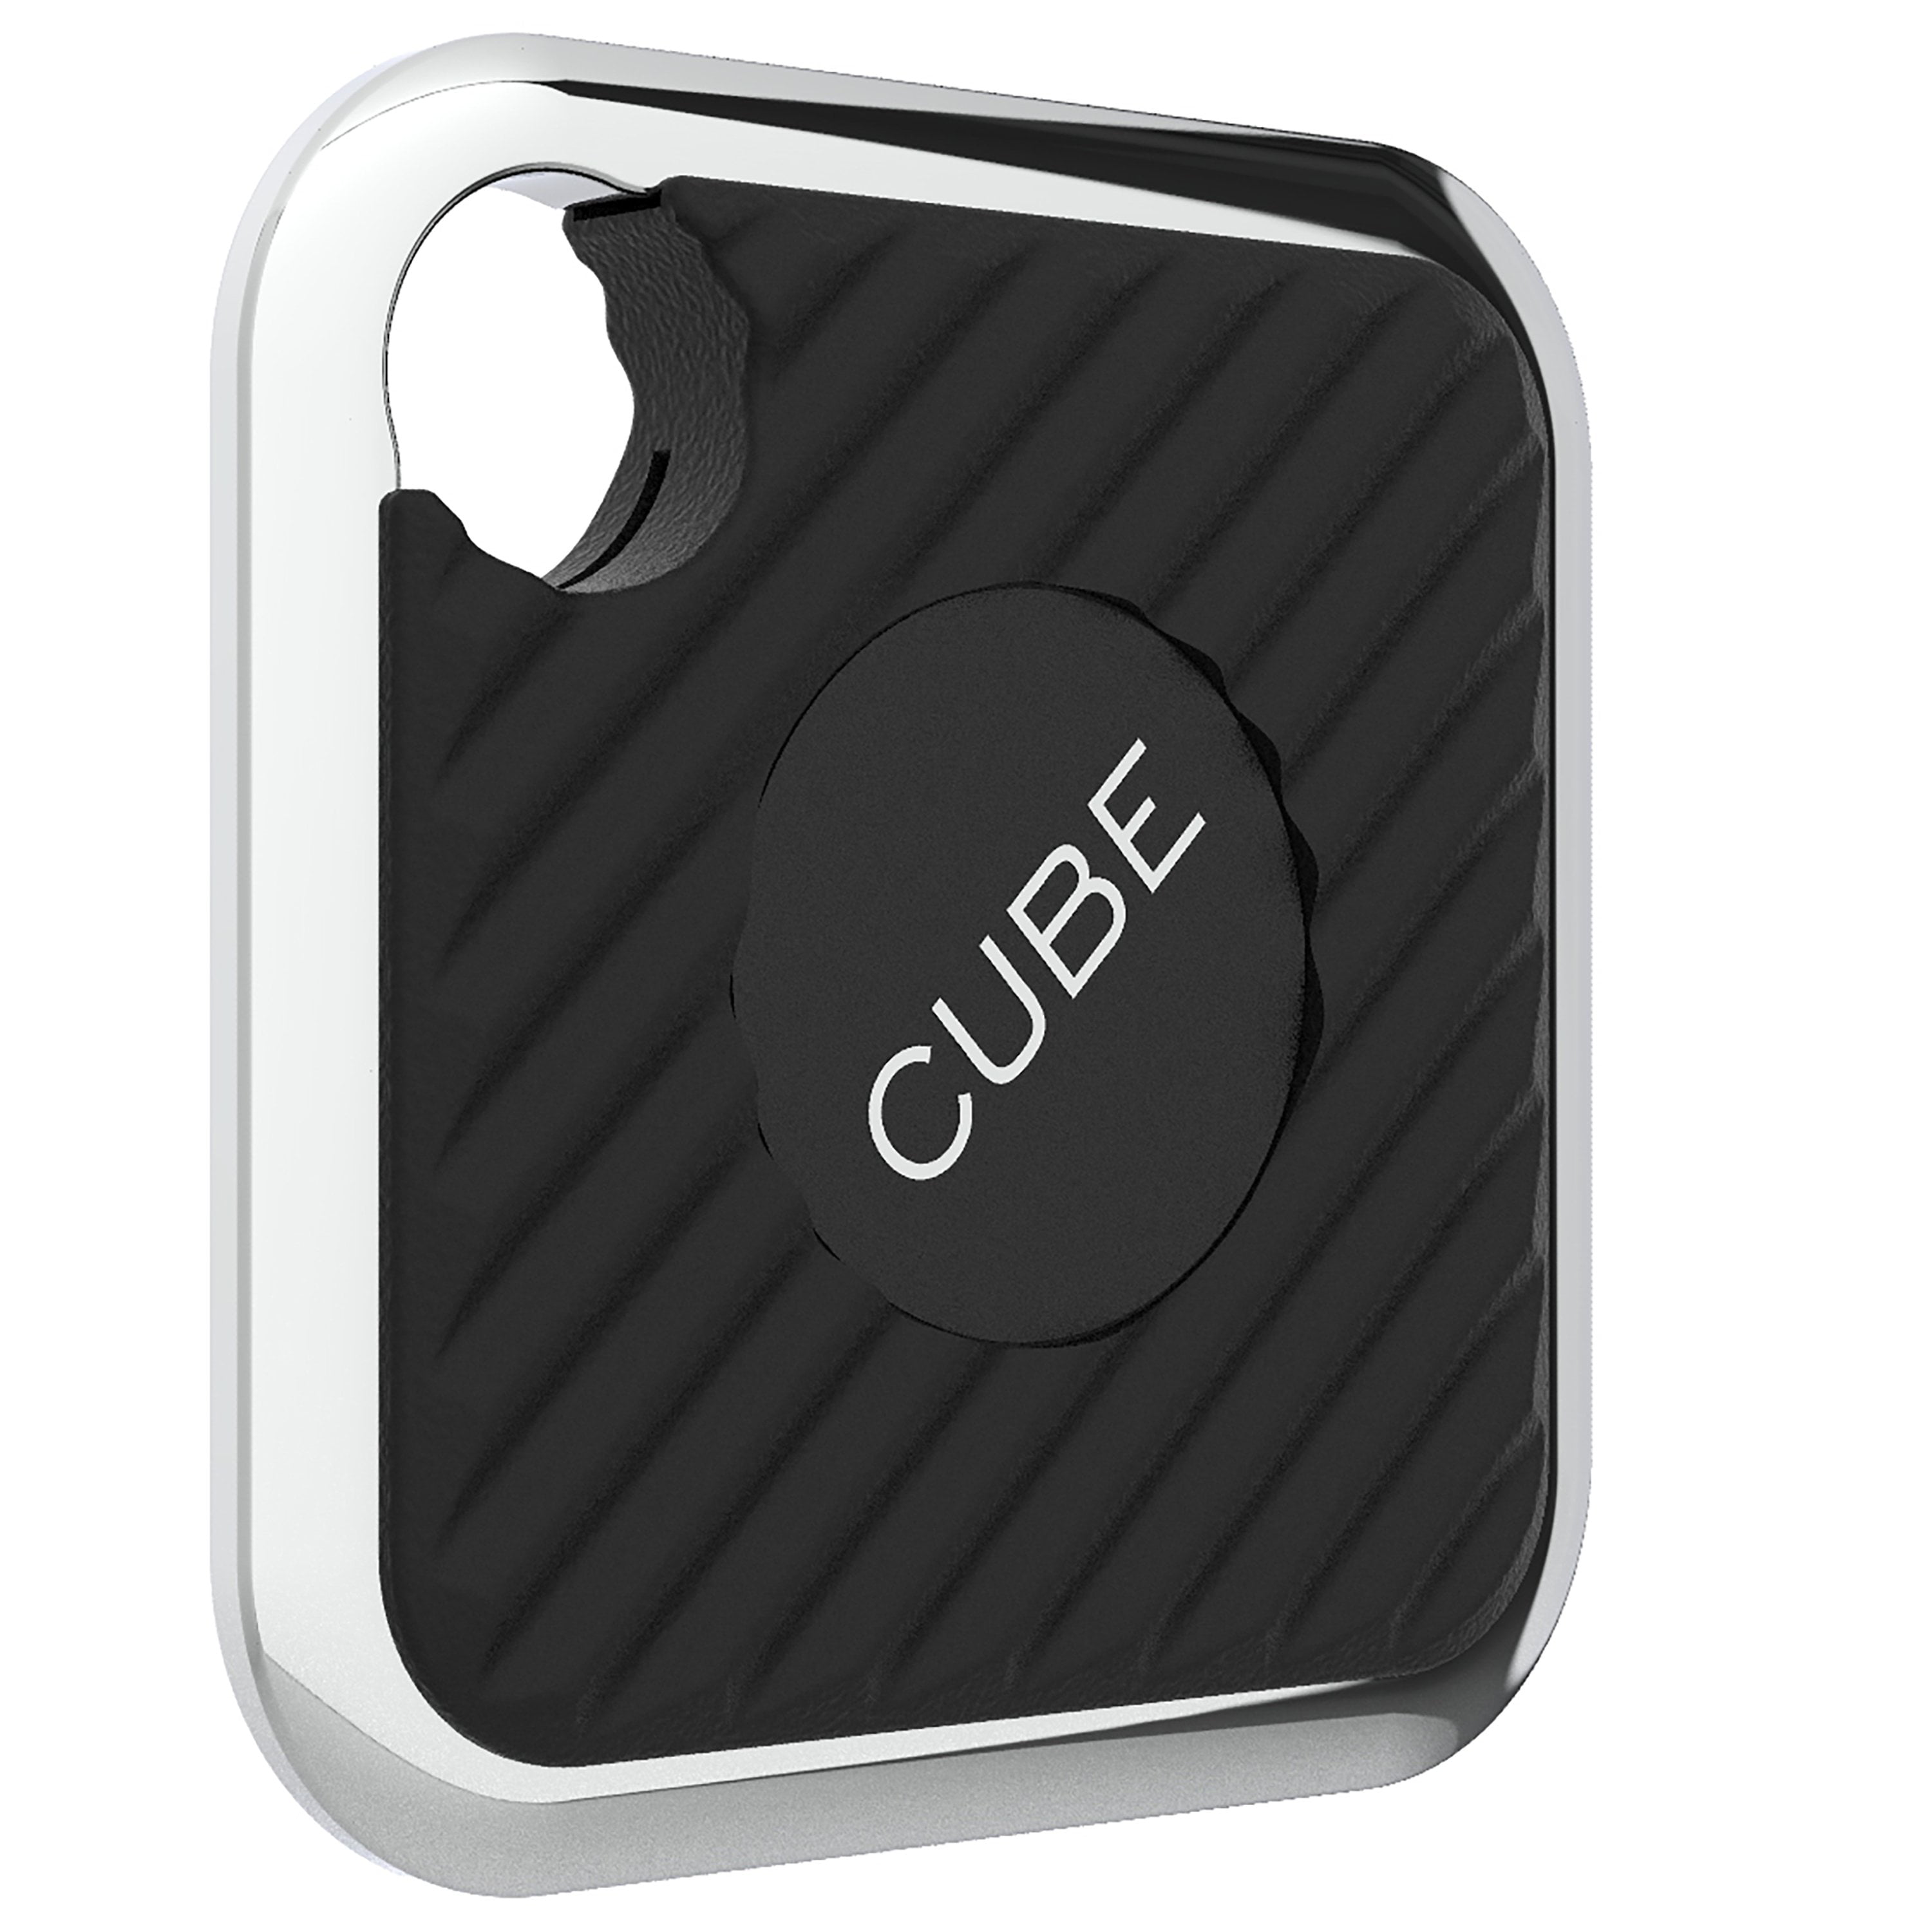 Cube Tracker  Find your Car, Dog, or Kids with Cube GPS